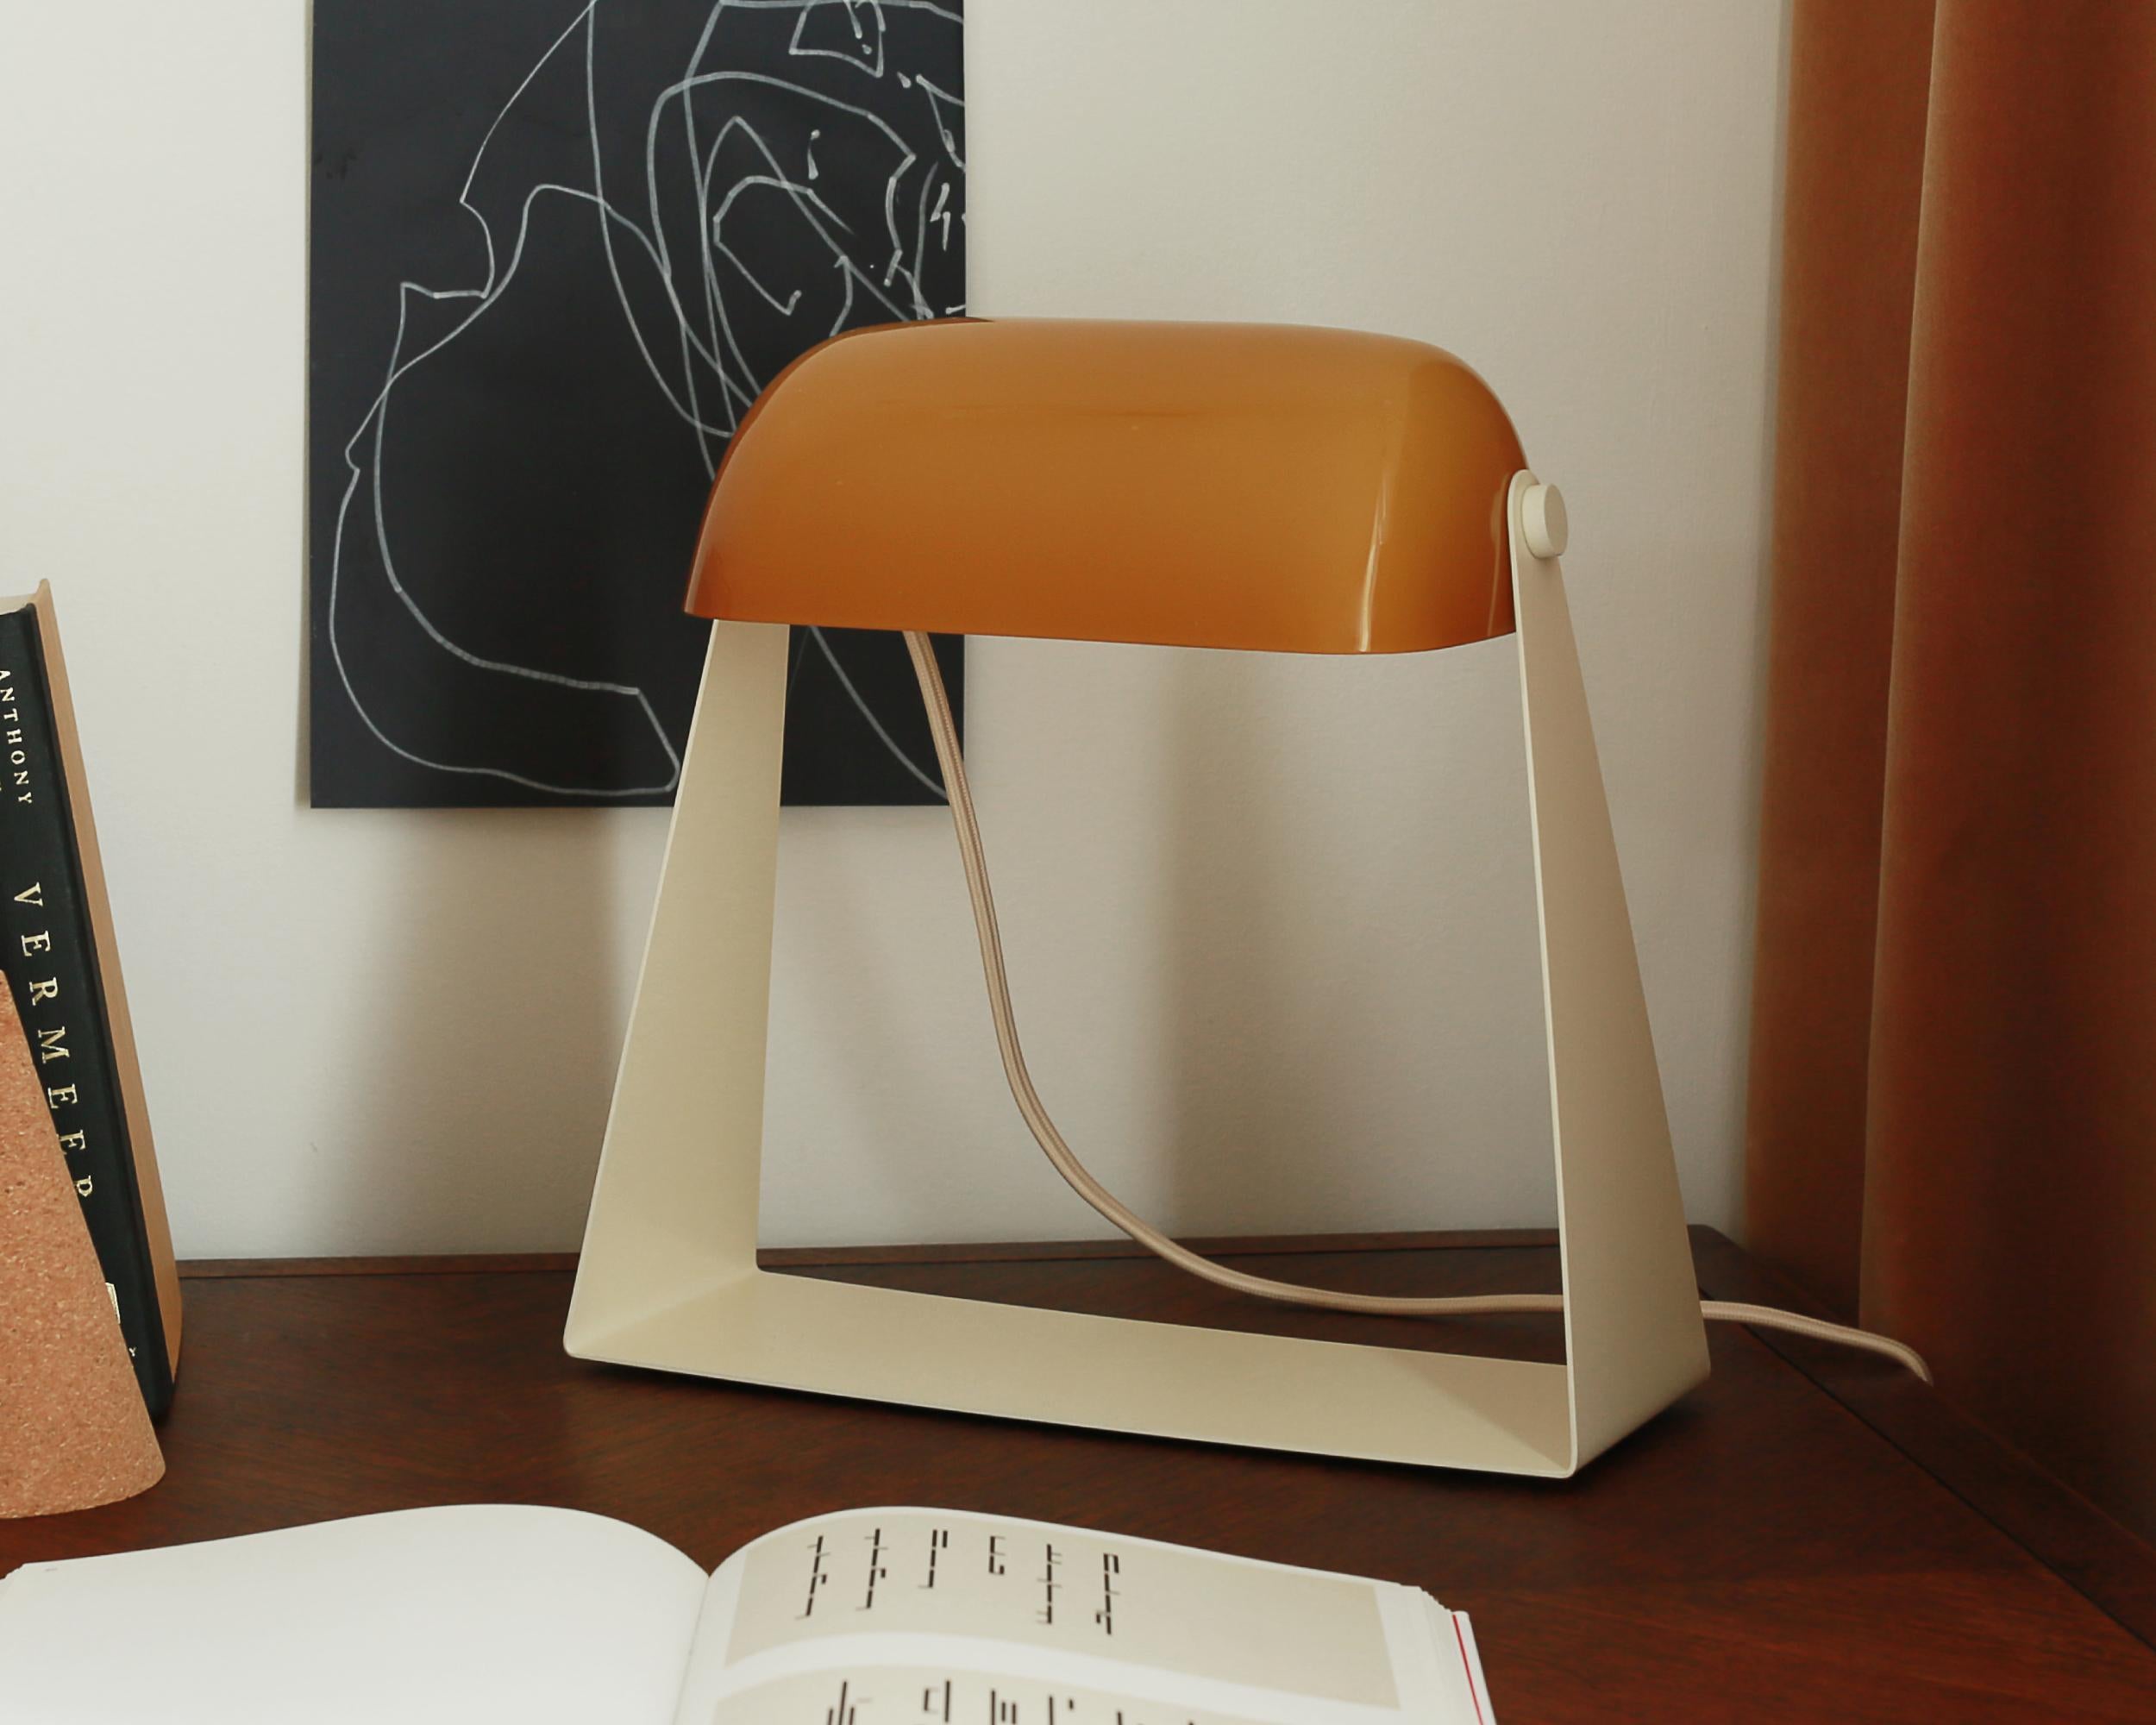 Contemporary Thew Table Lamp in off White Powder Coat with Ochre Glass Shade by Artig